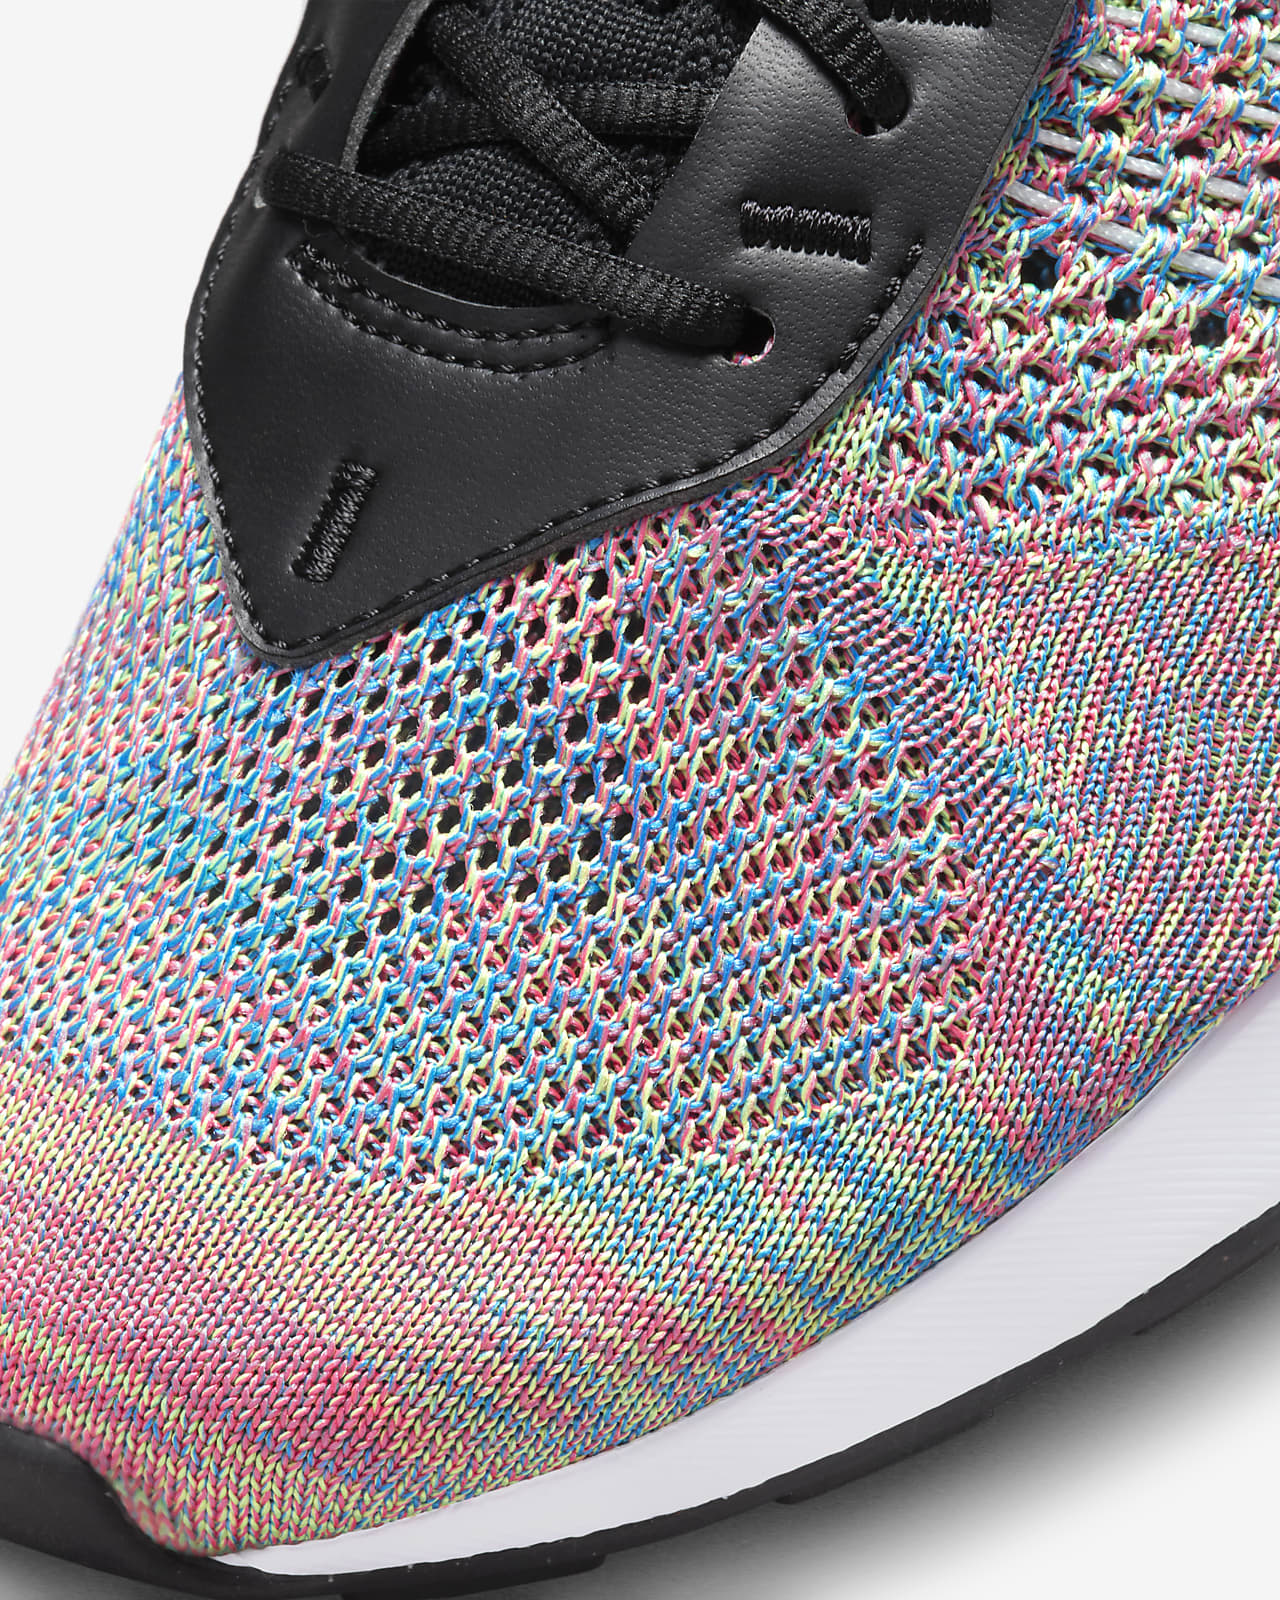 culture patient lecture Calzado para hombre Nike Air Max Flyknit Racer. Nike MX